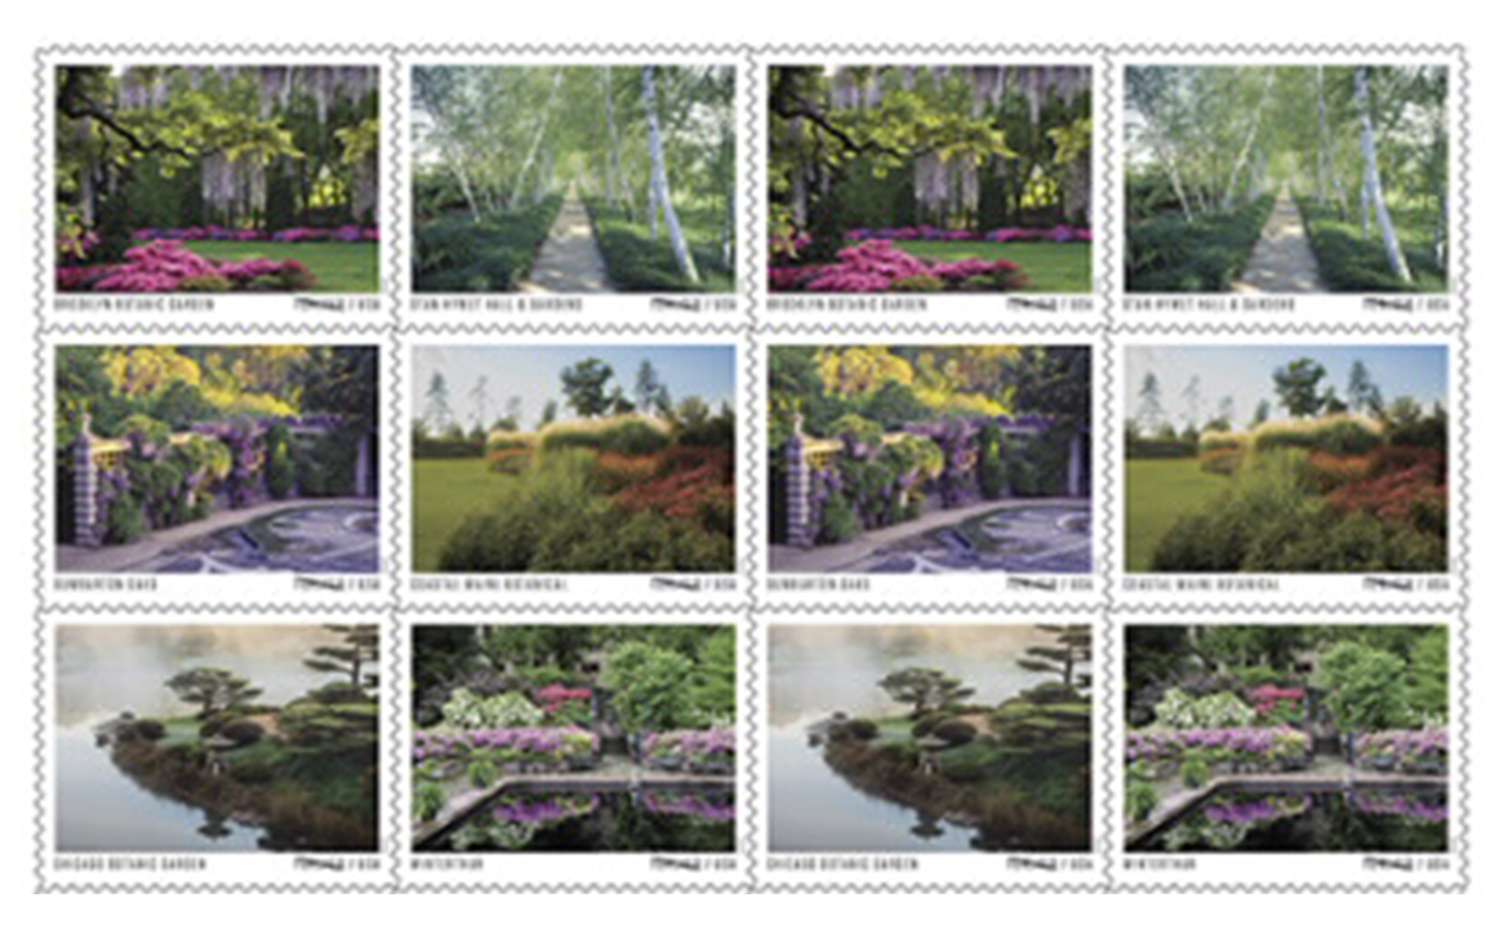 New garden themed USPS stamps